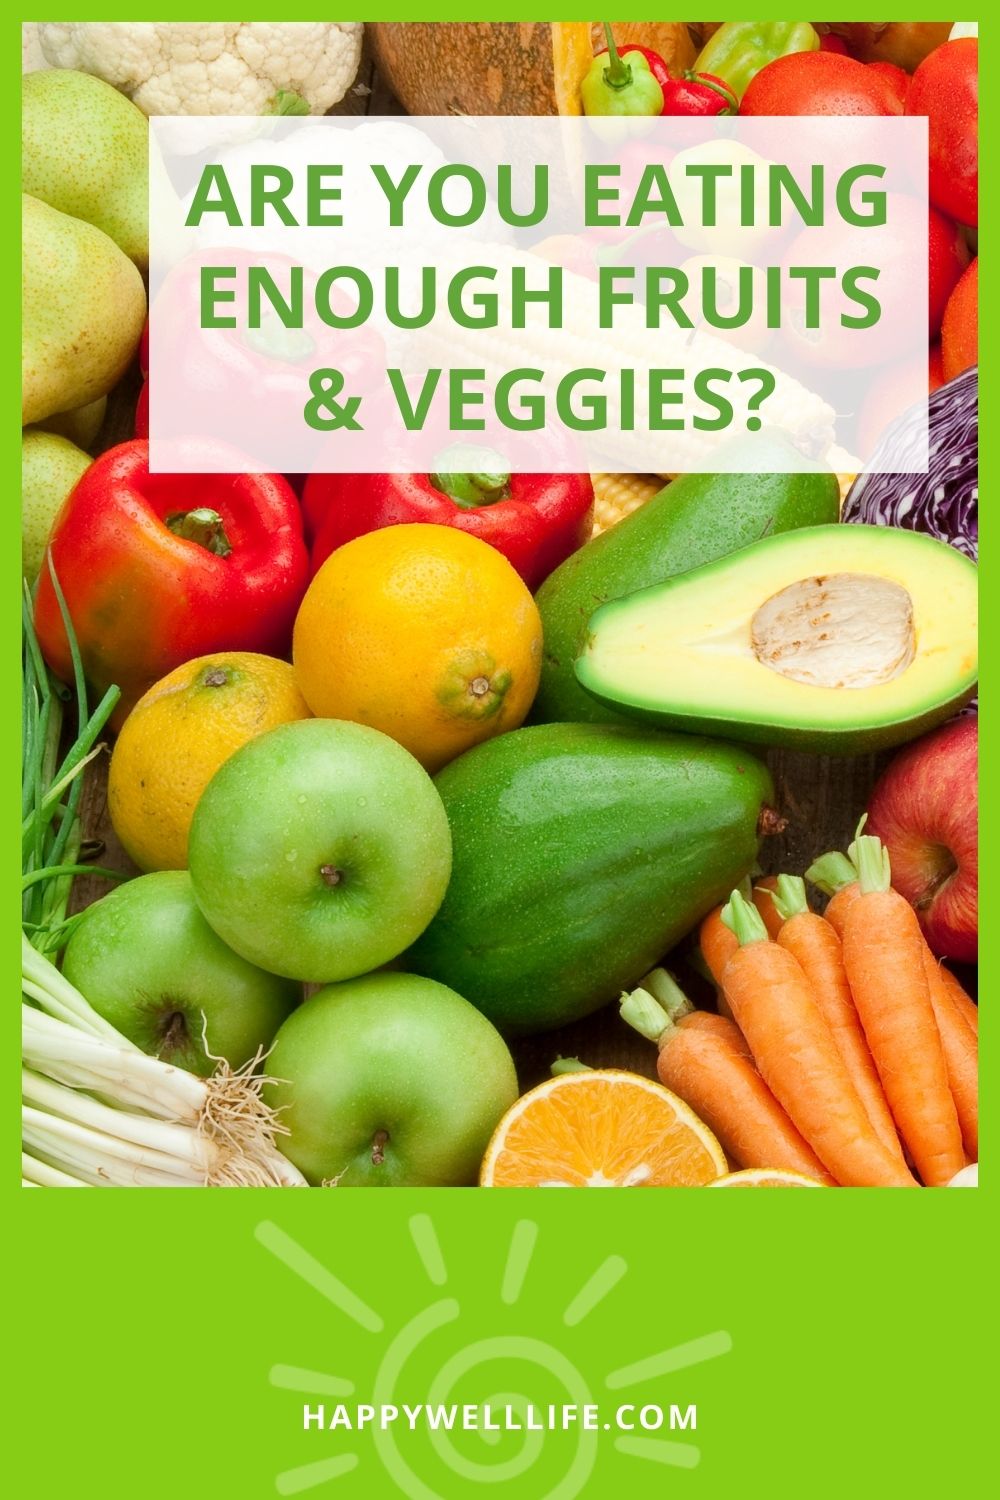 Are you eating enough Fruits & Veggies image of fruits and veggies
